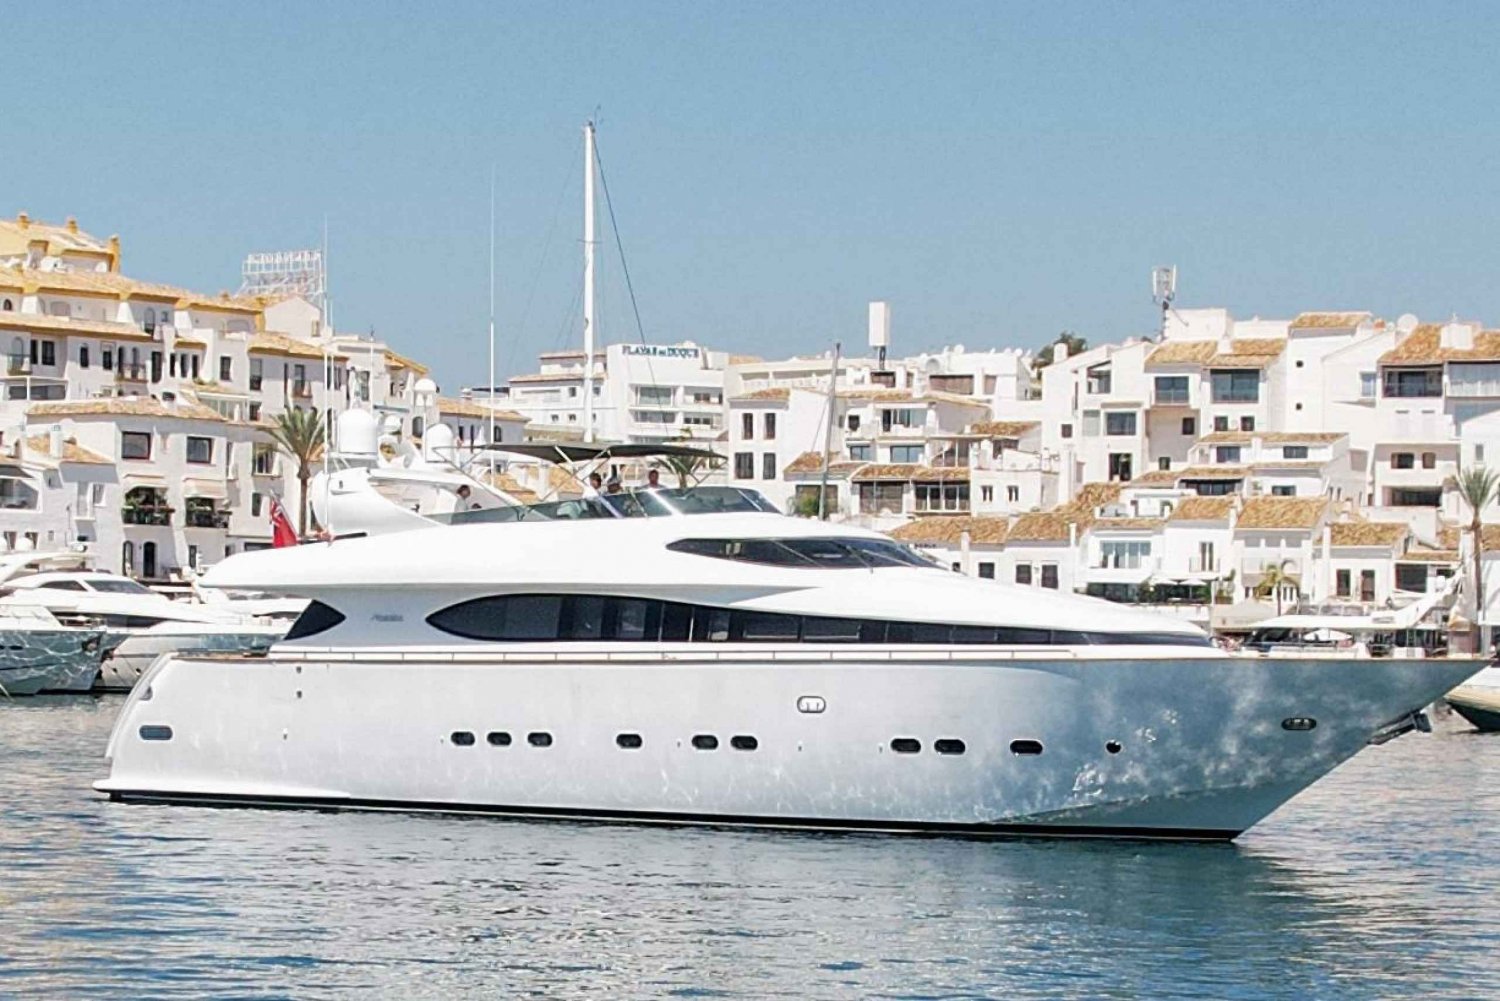 SuperYacht 8 Hour Charter:12 passengers:drinks and food inc.